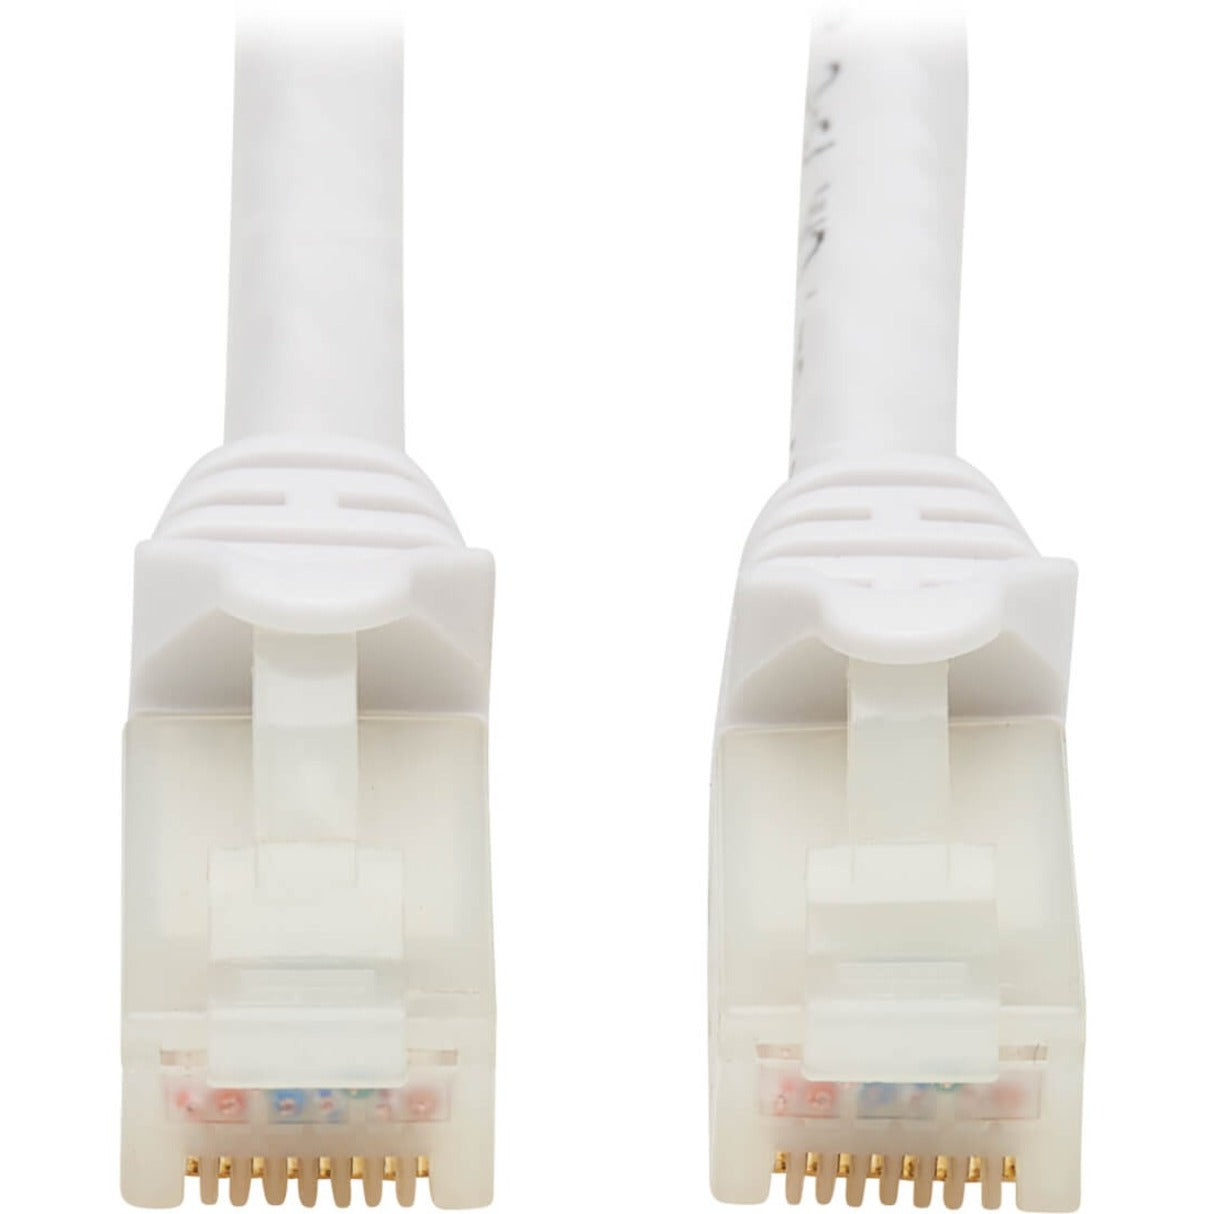 Tripp Lite by Eaton N261AB-003-WH Cat.6a UTP Network Cable, High-Speed Data Transfer